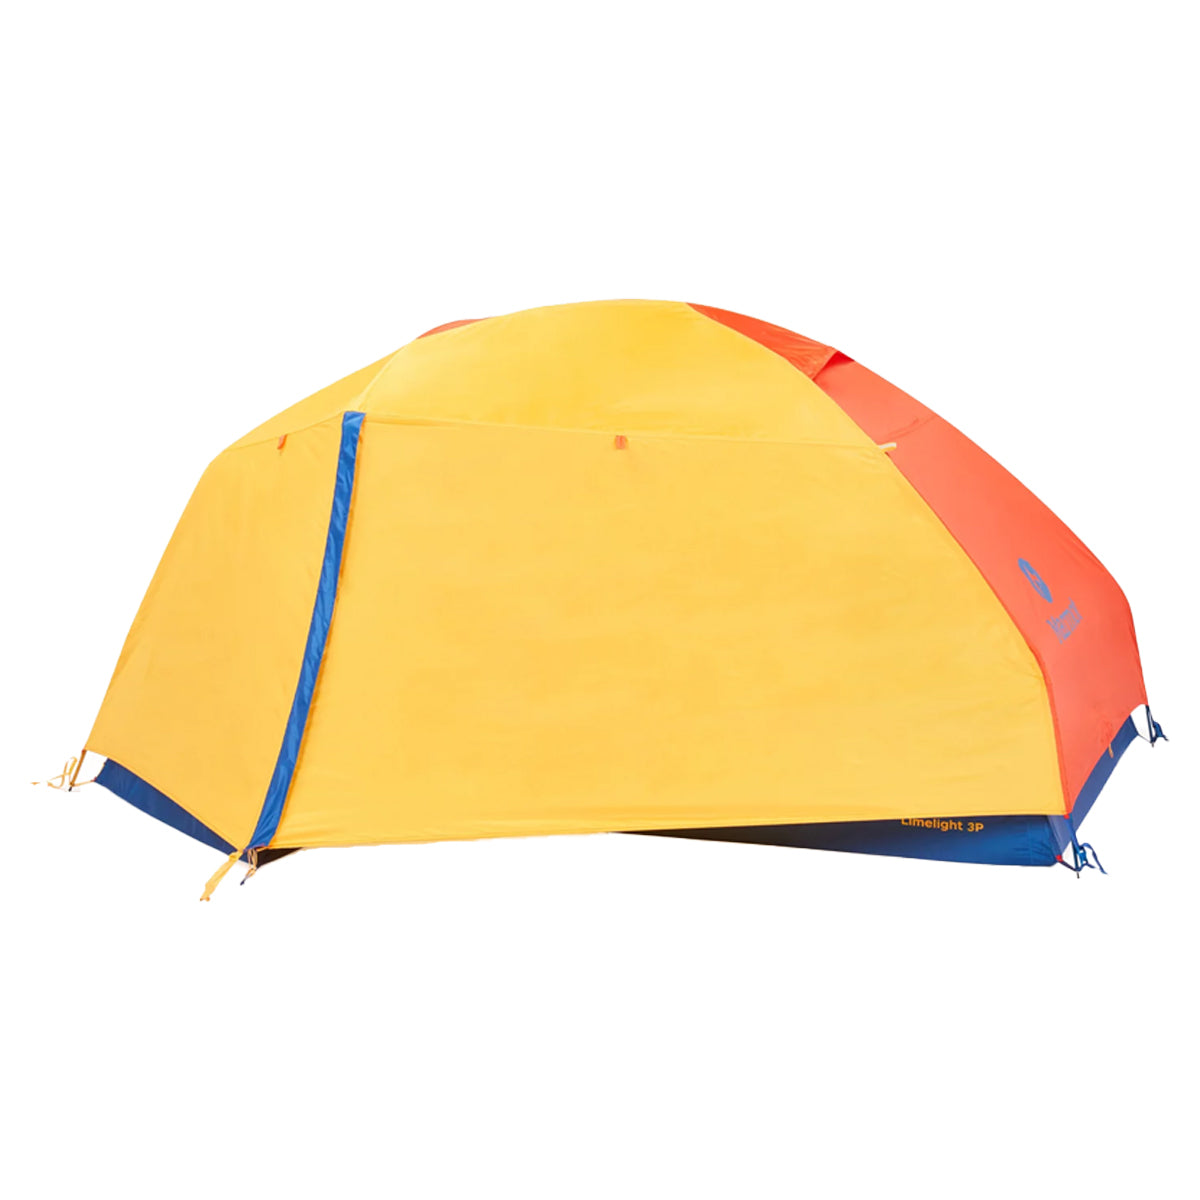 Marmot Limelight 3 Person Tent in  by GOHUNT | Marmot - GOHUNT Shop